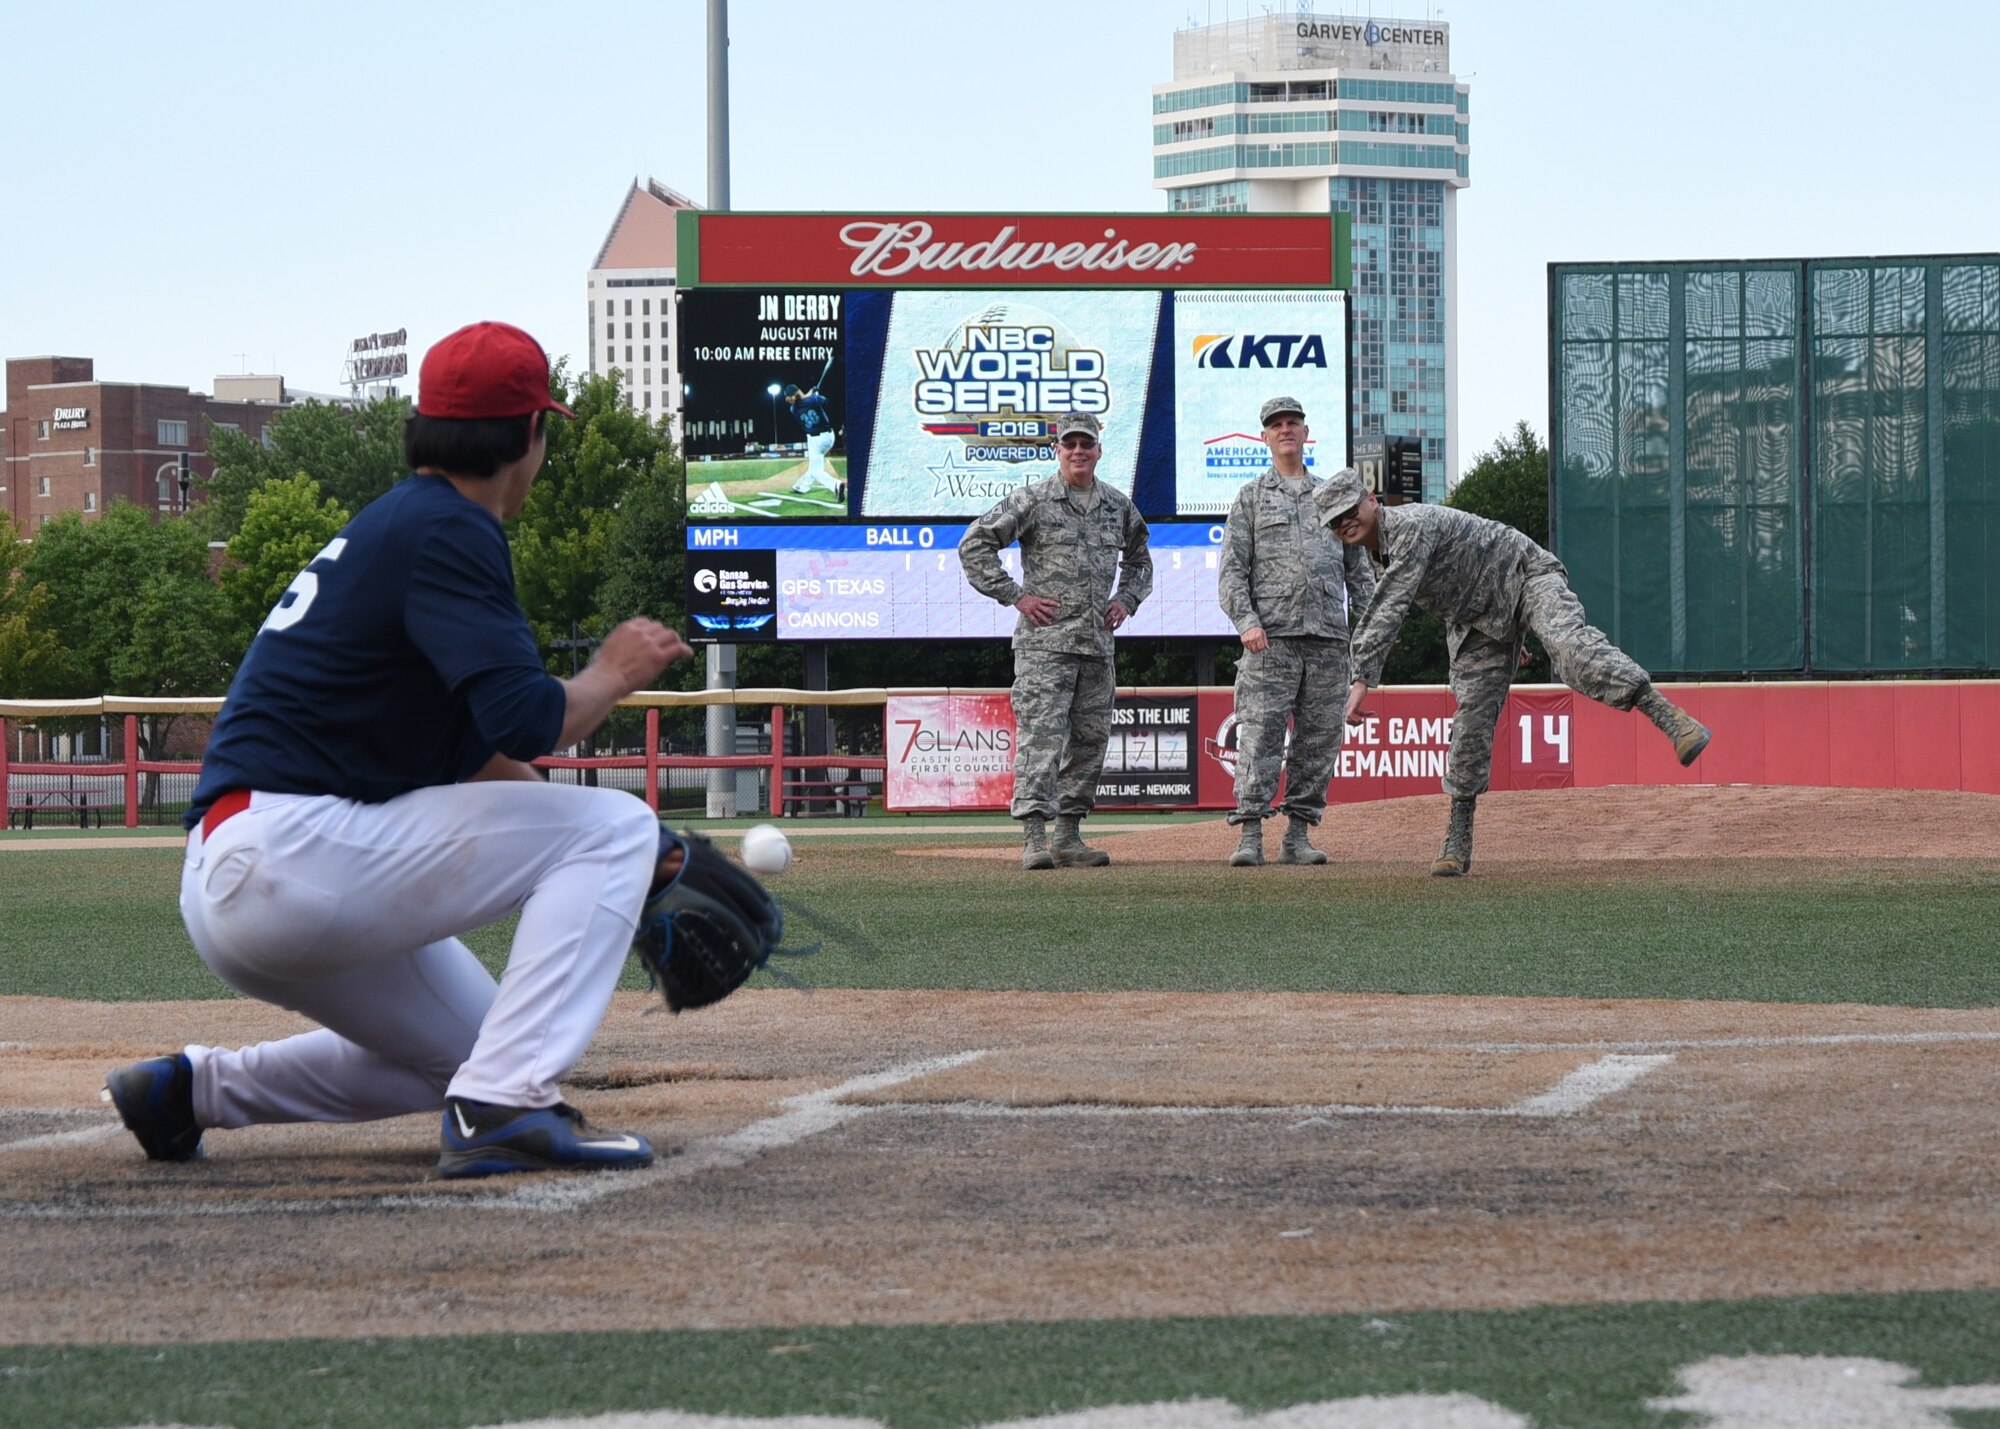 Airman 1st Class Anthony Binas throws the first pitch at a National Baseball Congress World Series baseball game.